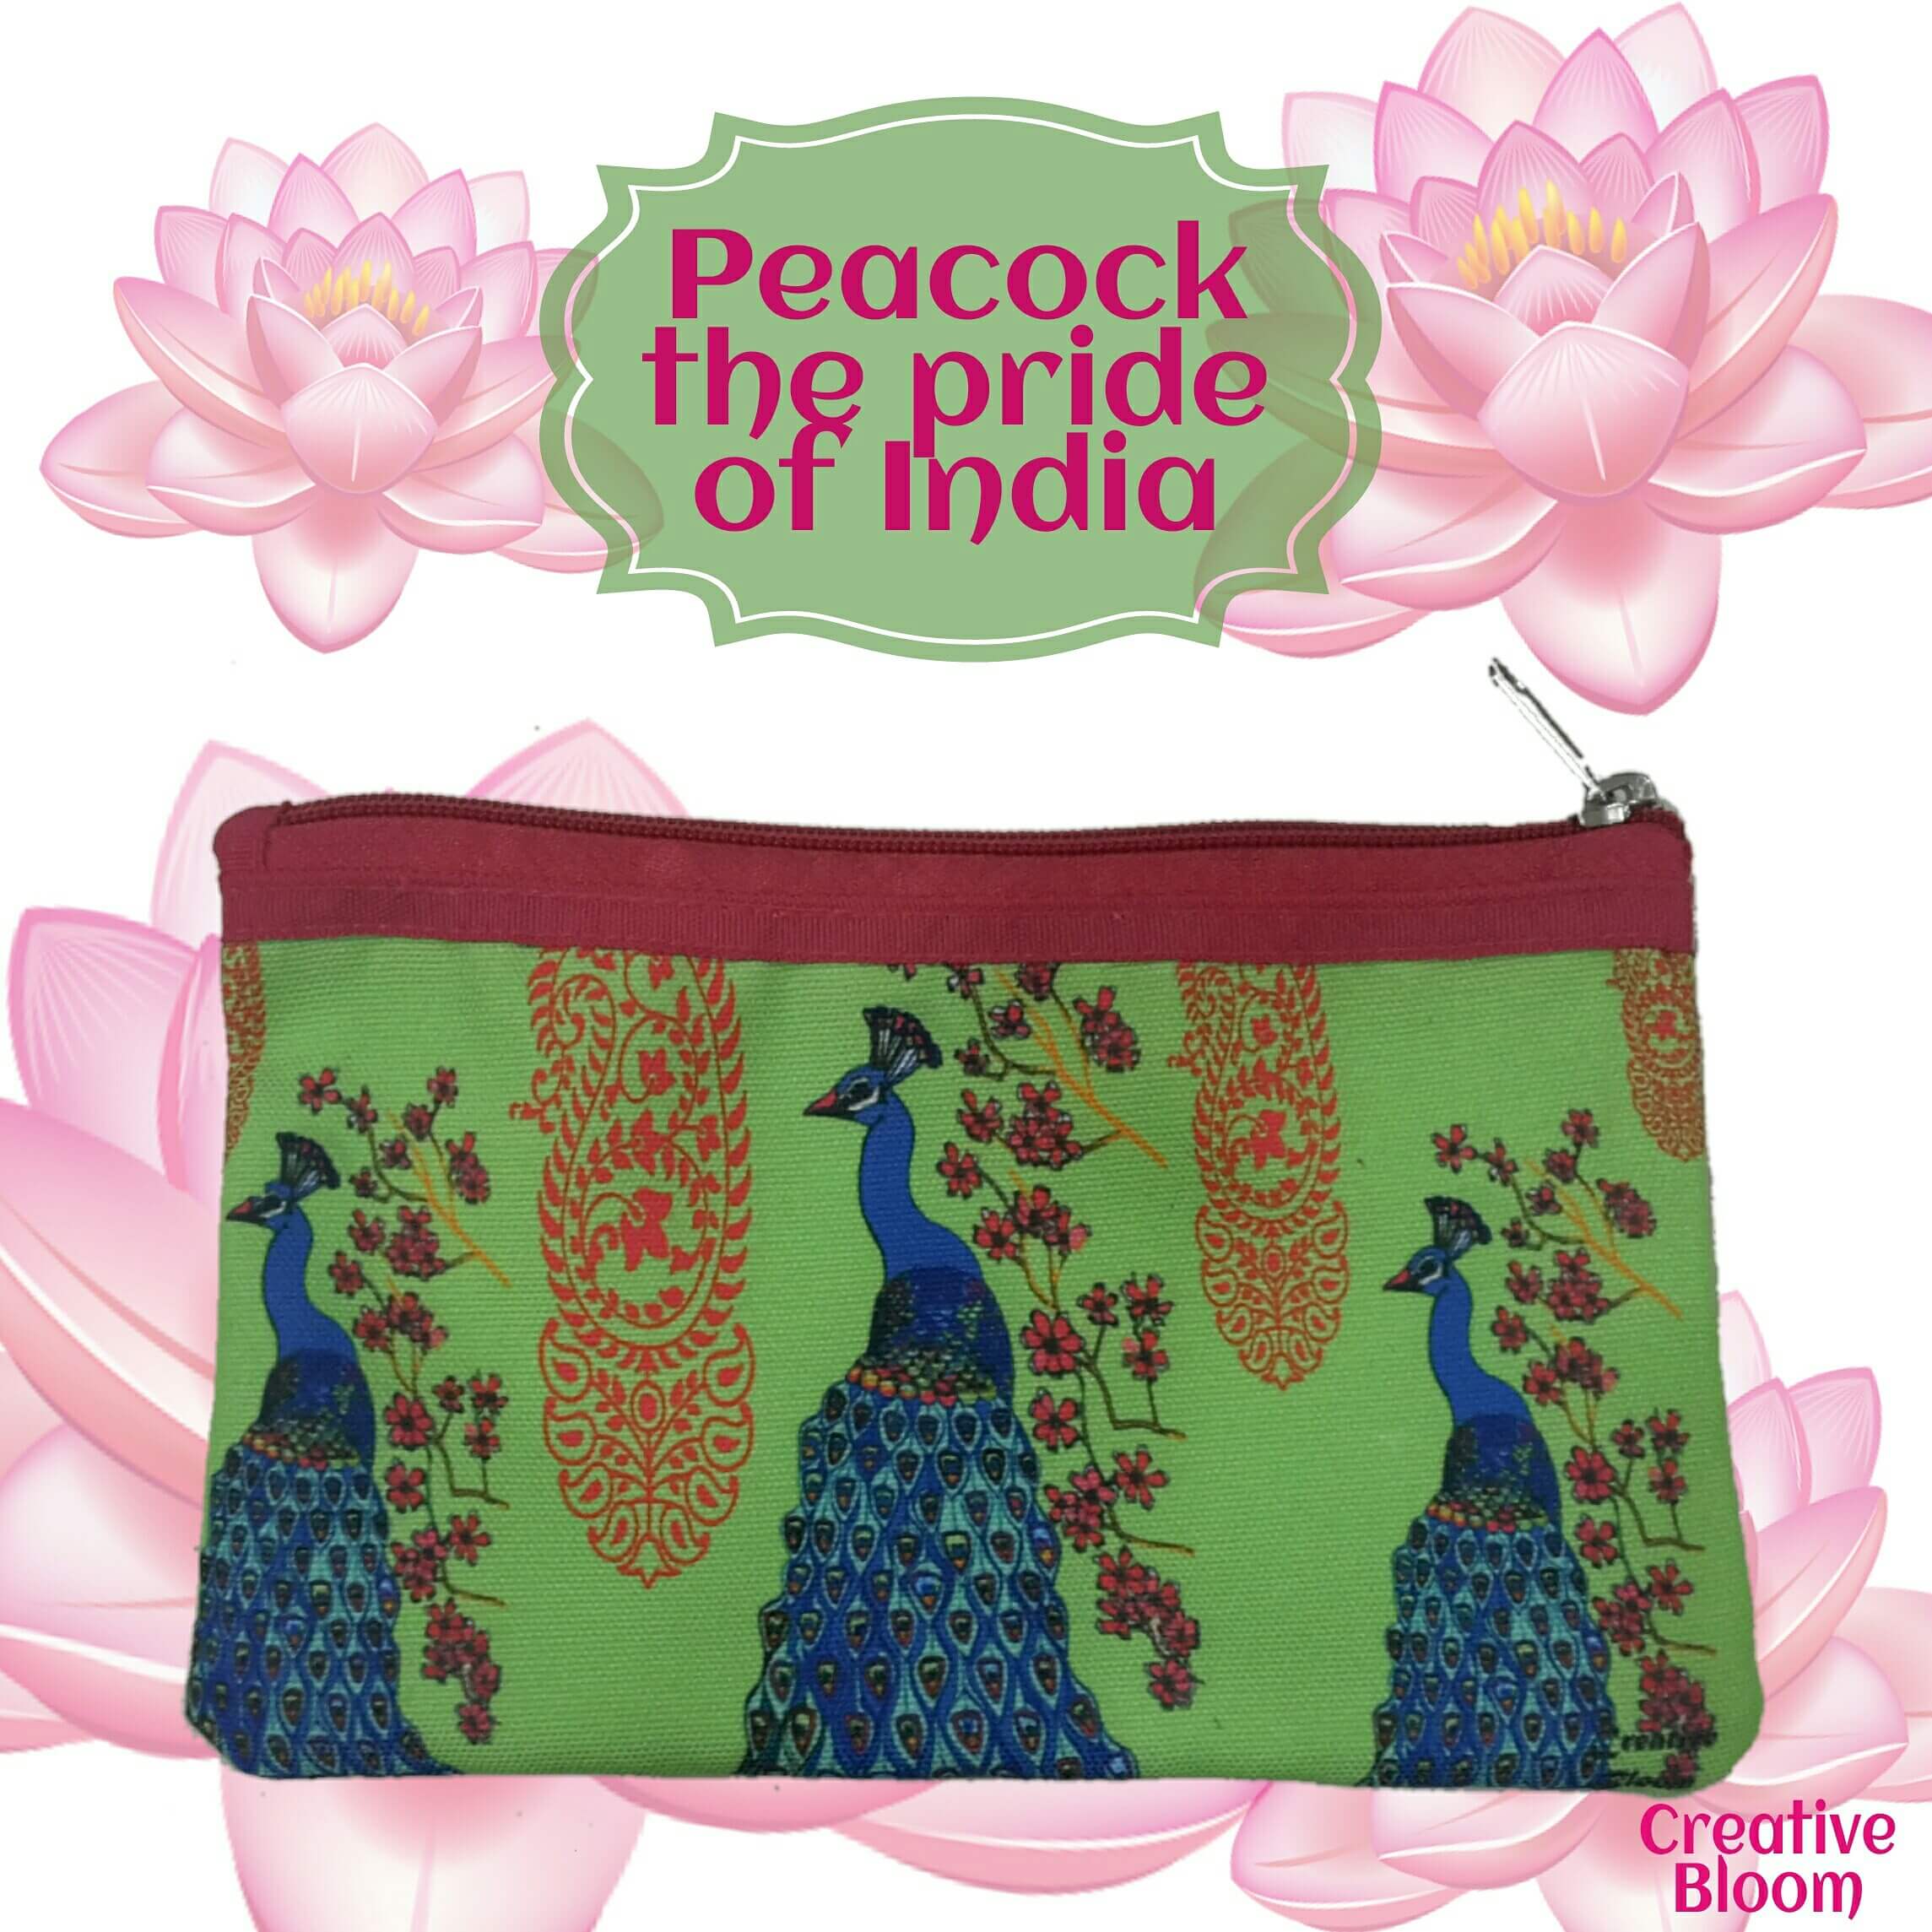 Peacock-the pride of India Pouch